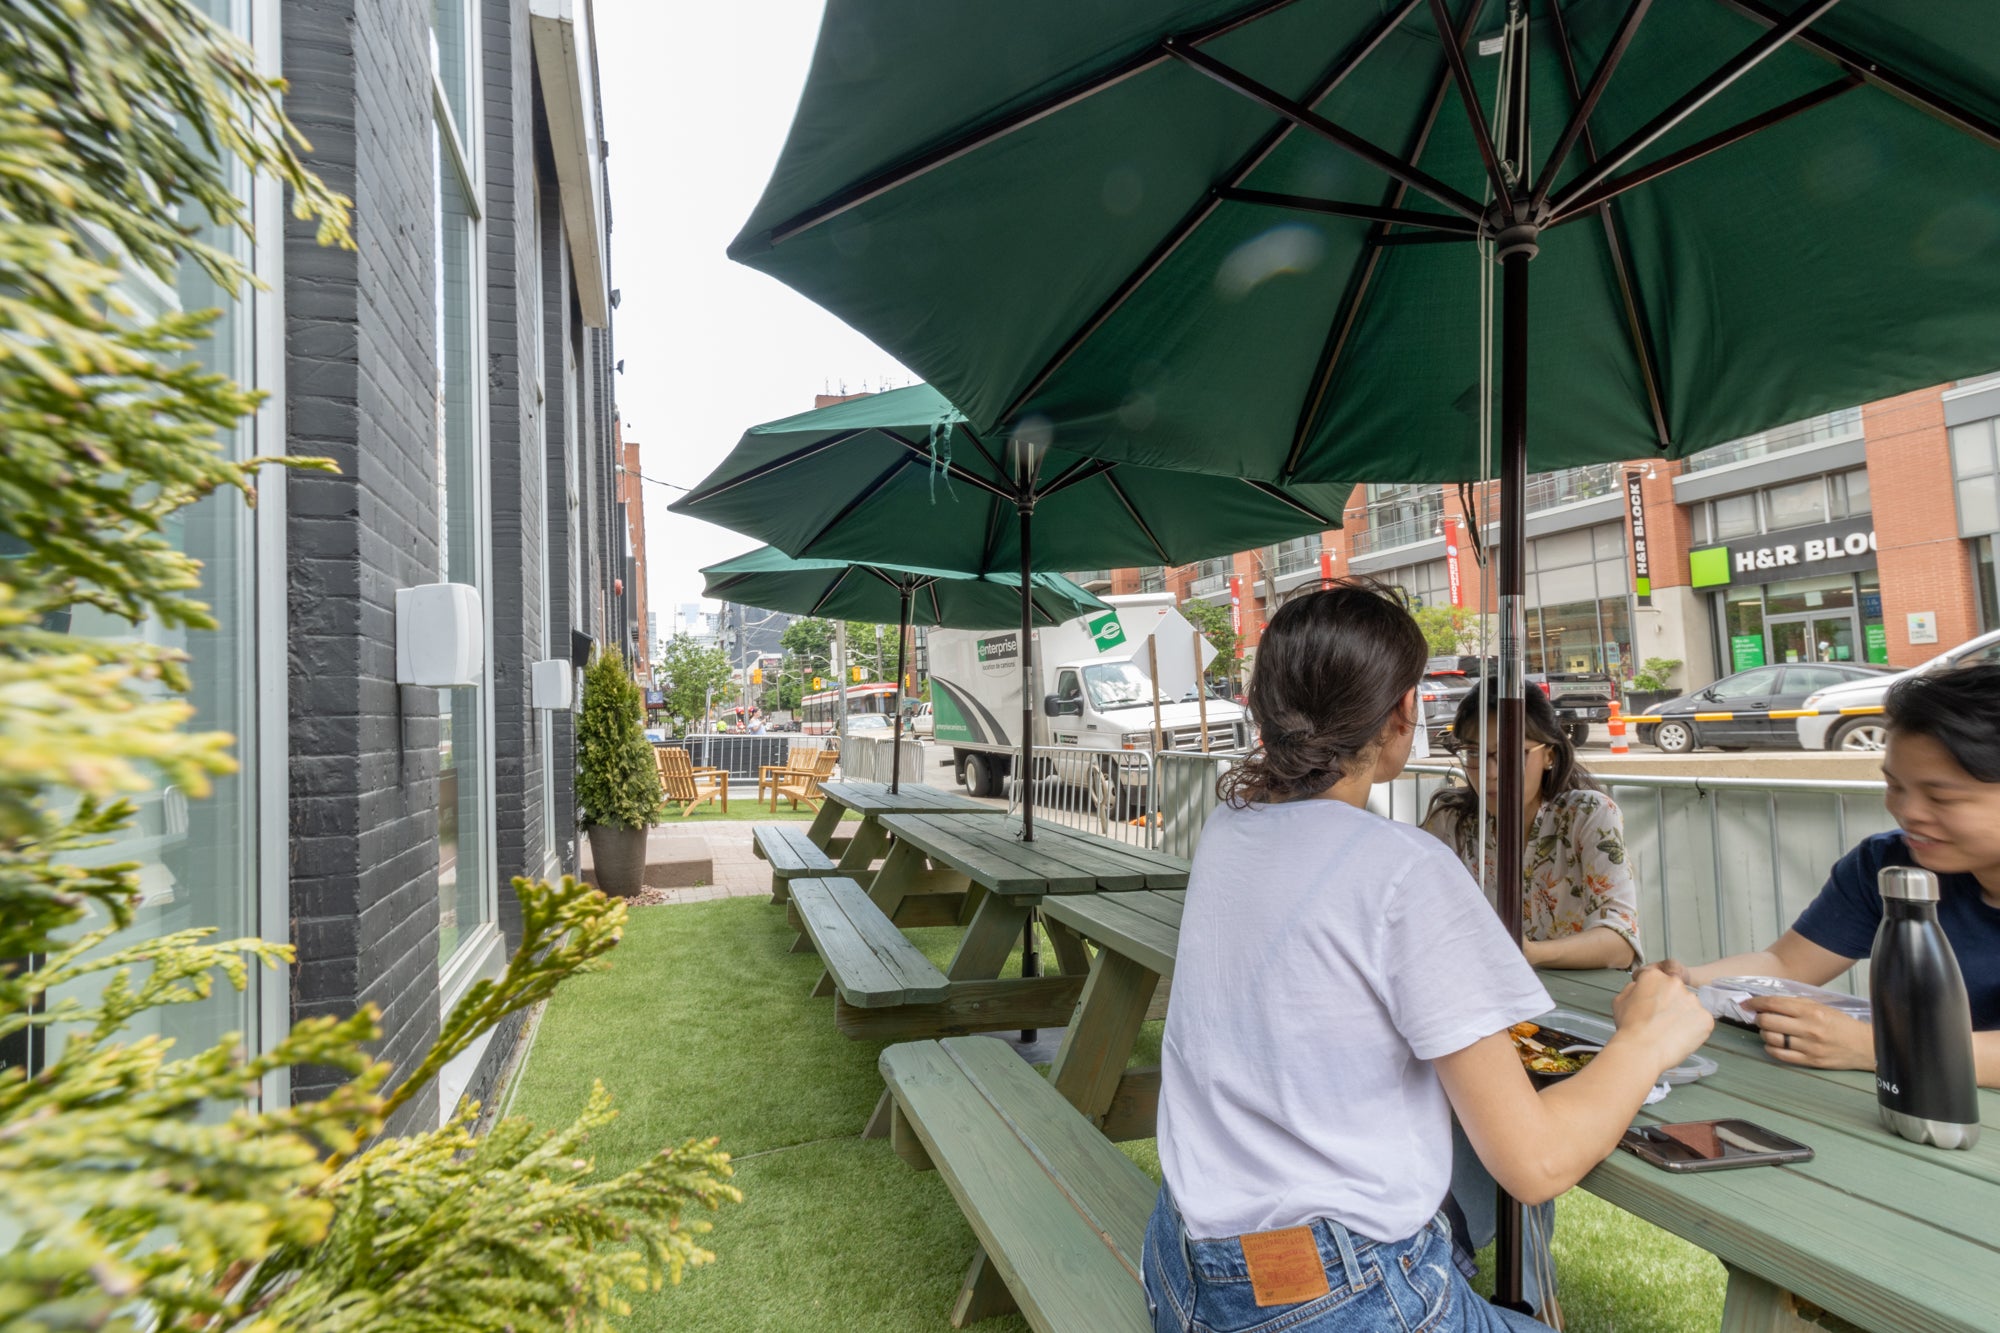 StartWell Coworking's Summer Patio on King Street West in Toronto - A great outdoor space for guests in meetings and coworking members.